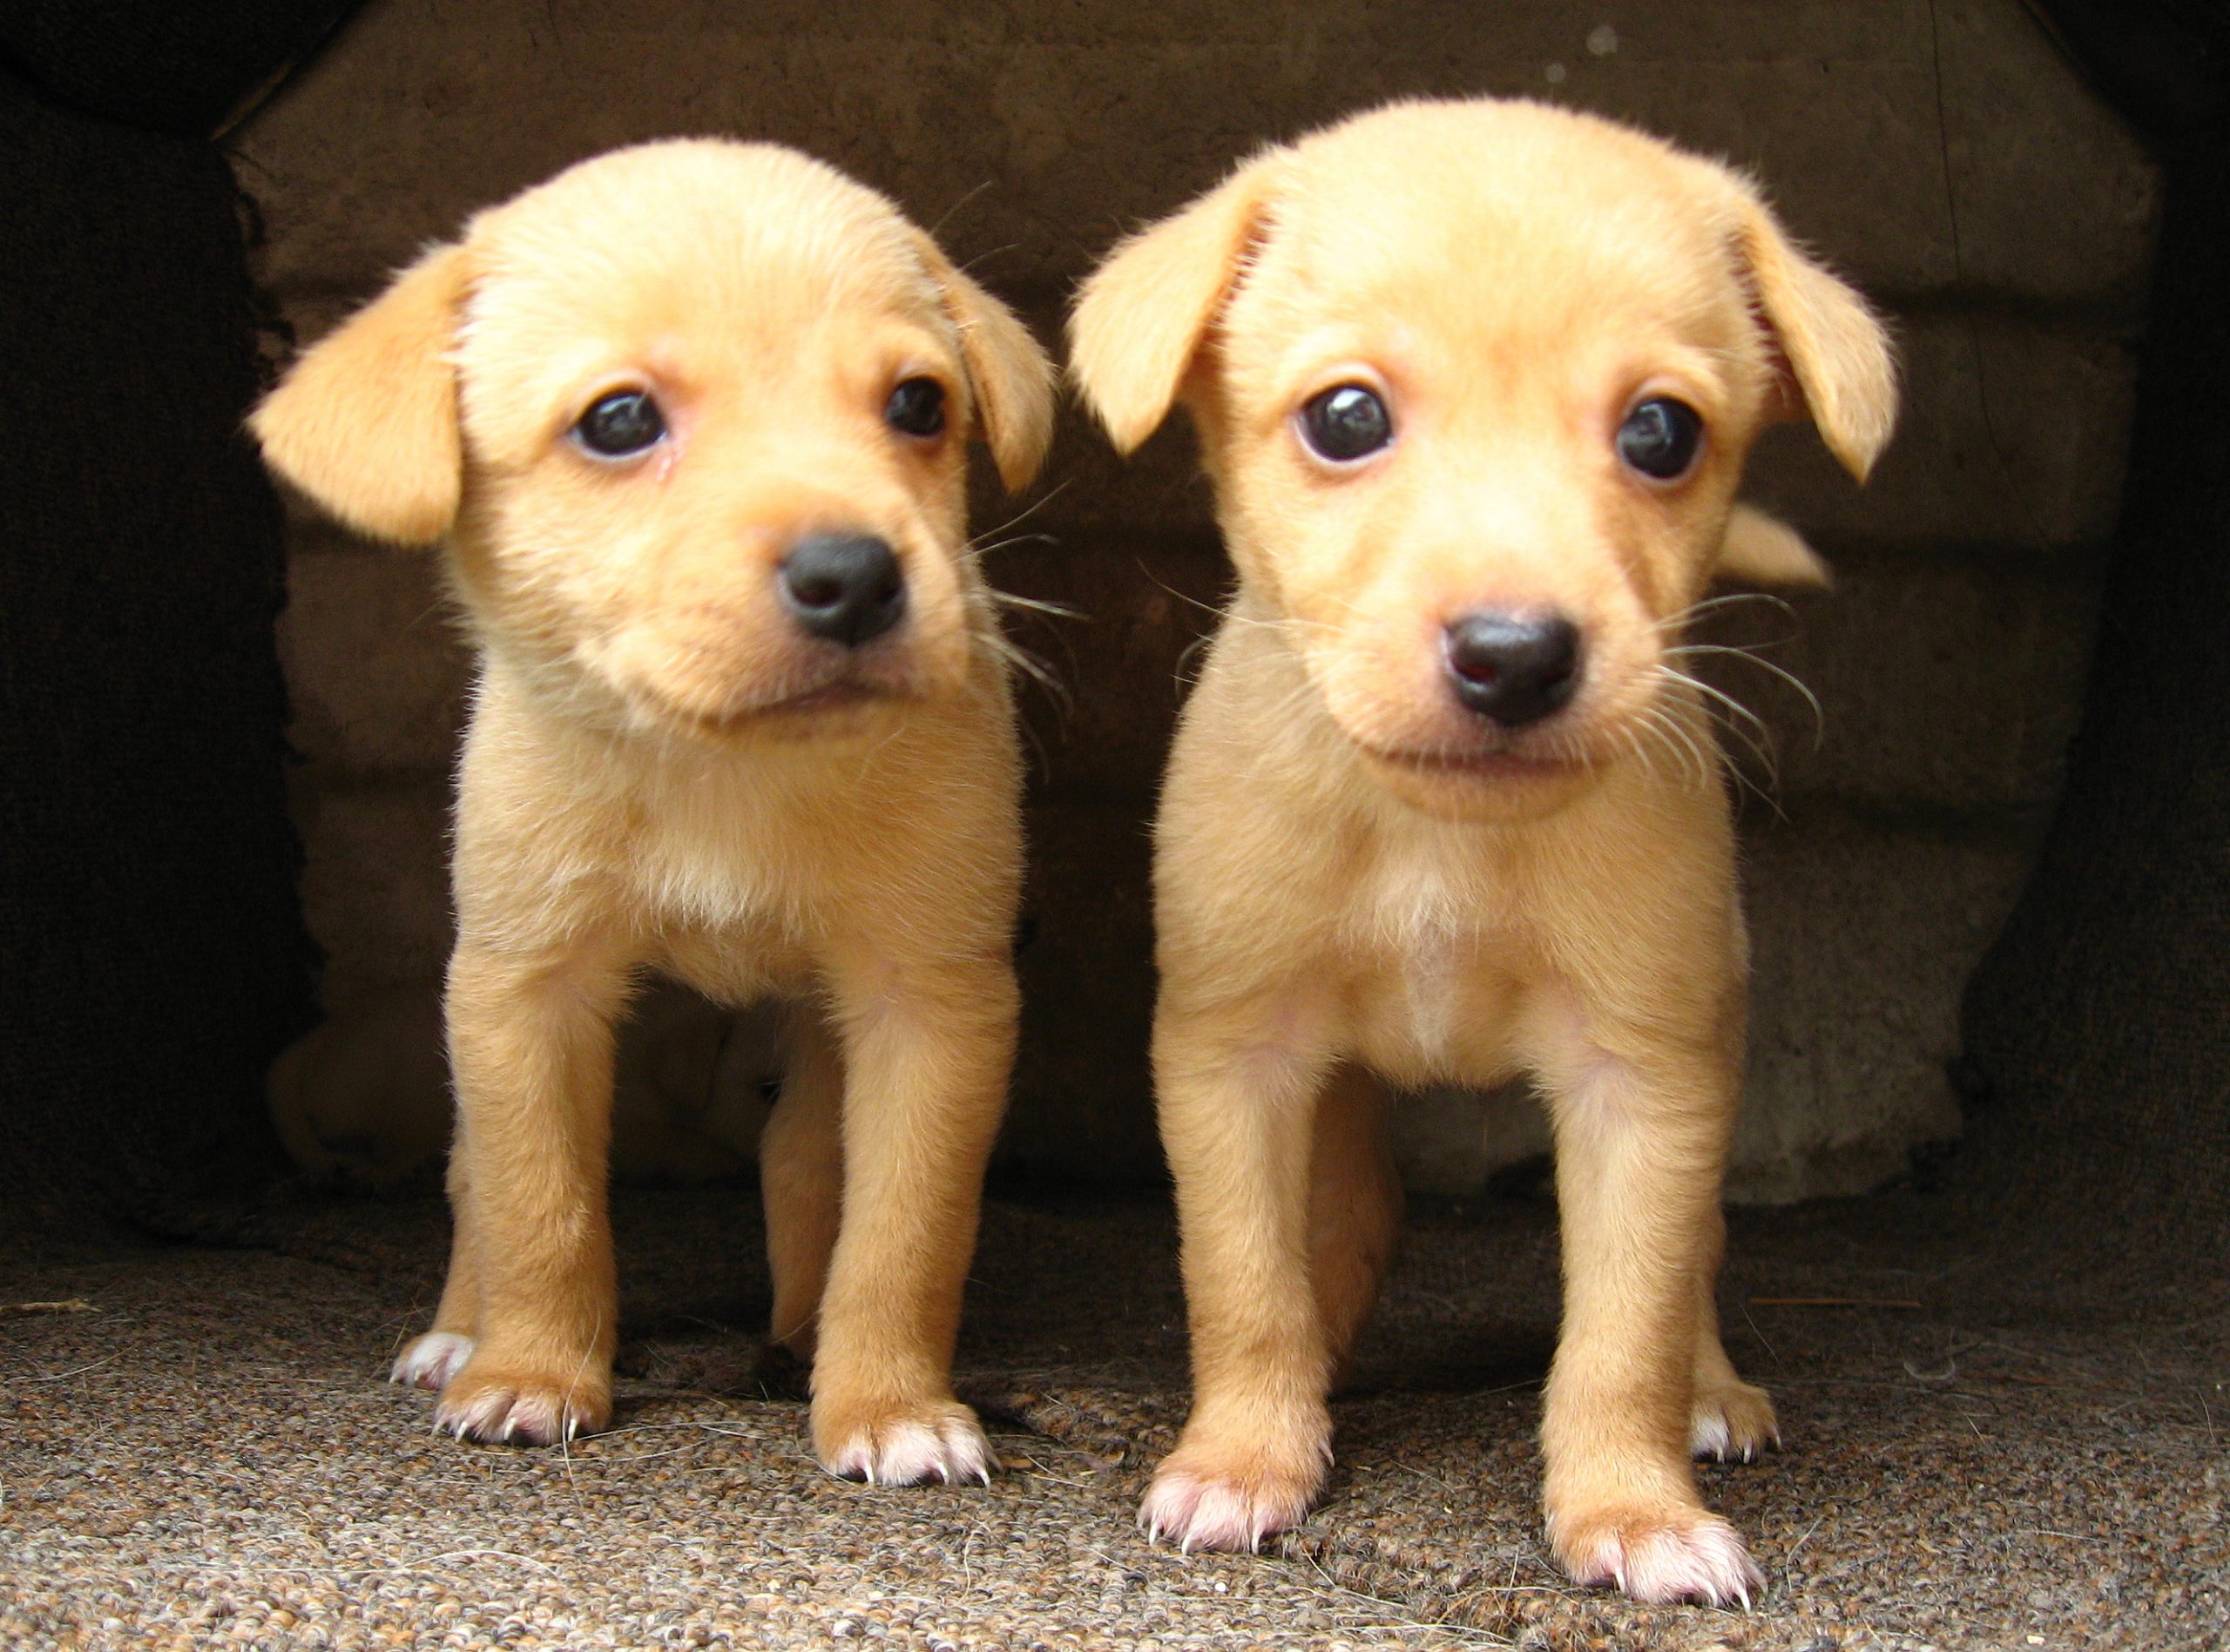 This picture shows two yellow puppies of similar age and size.